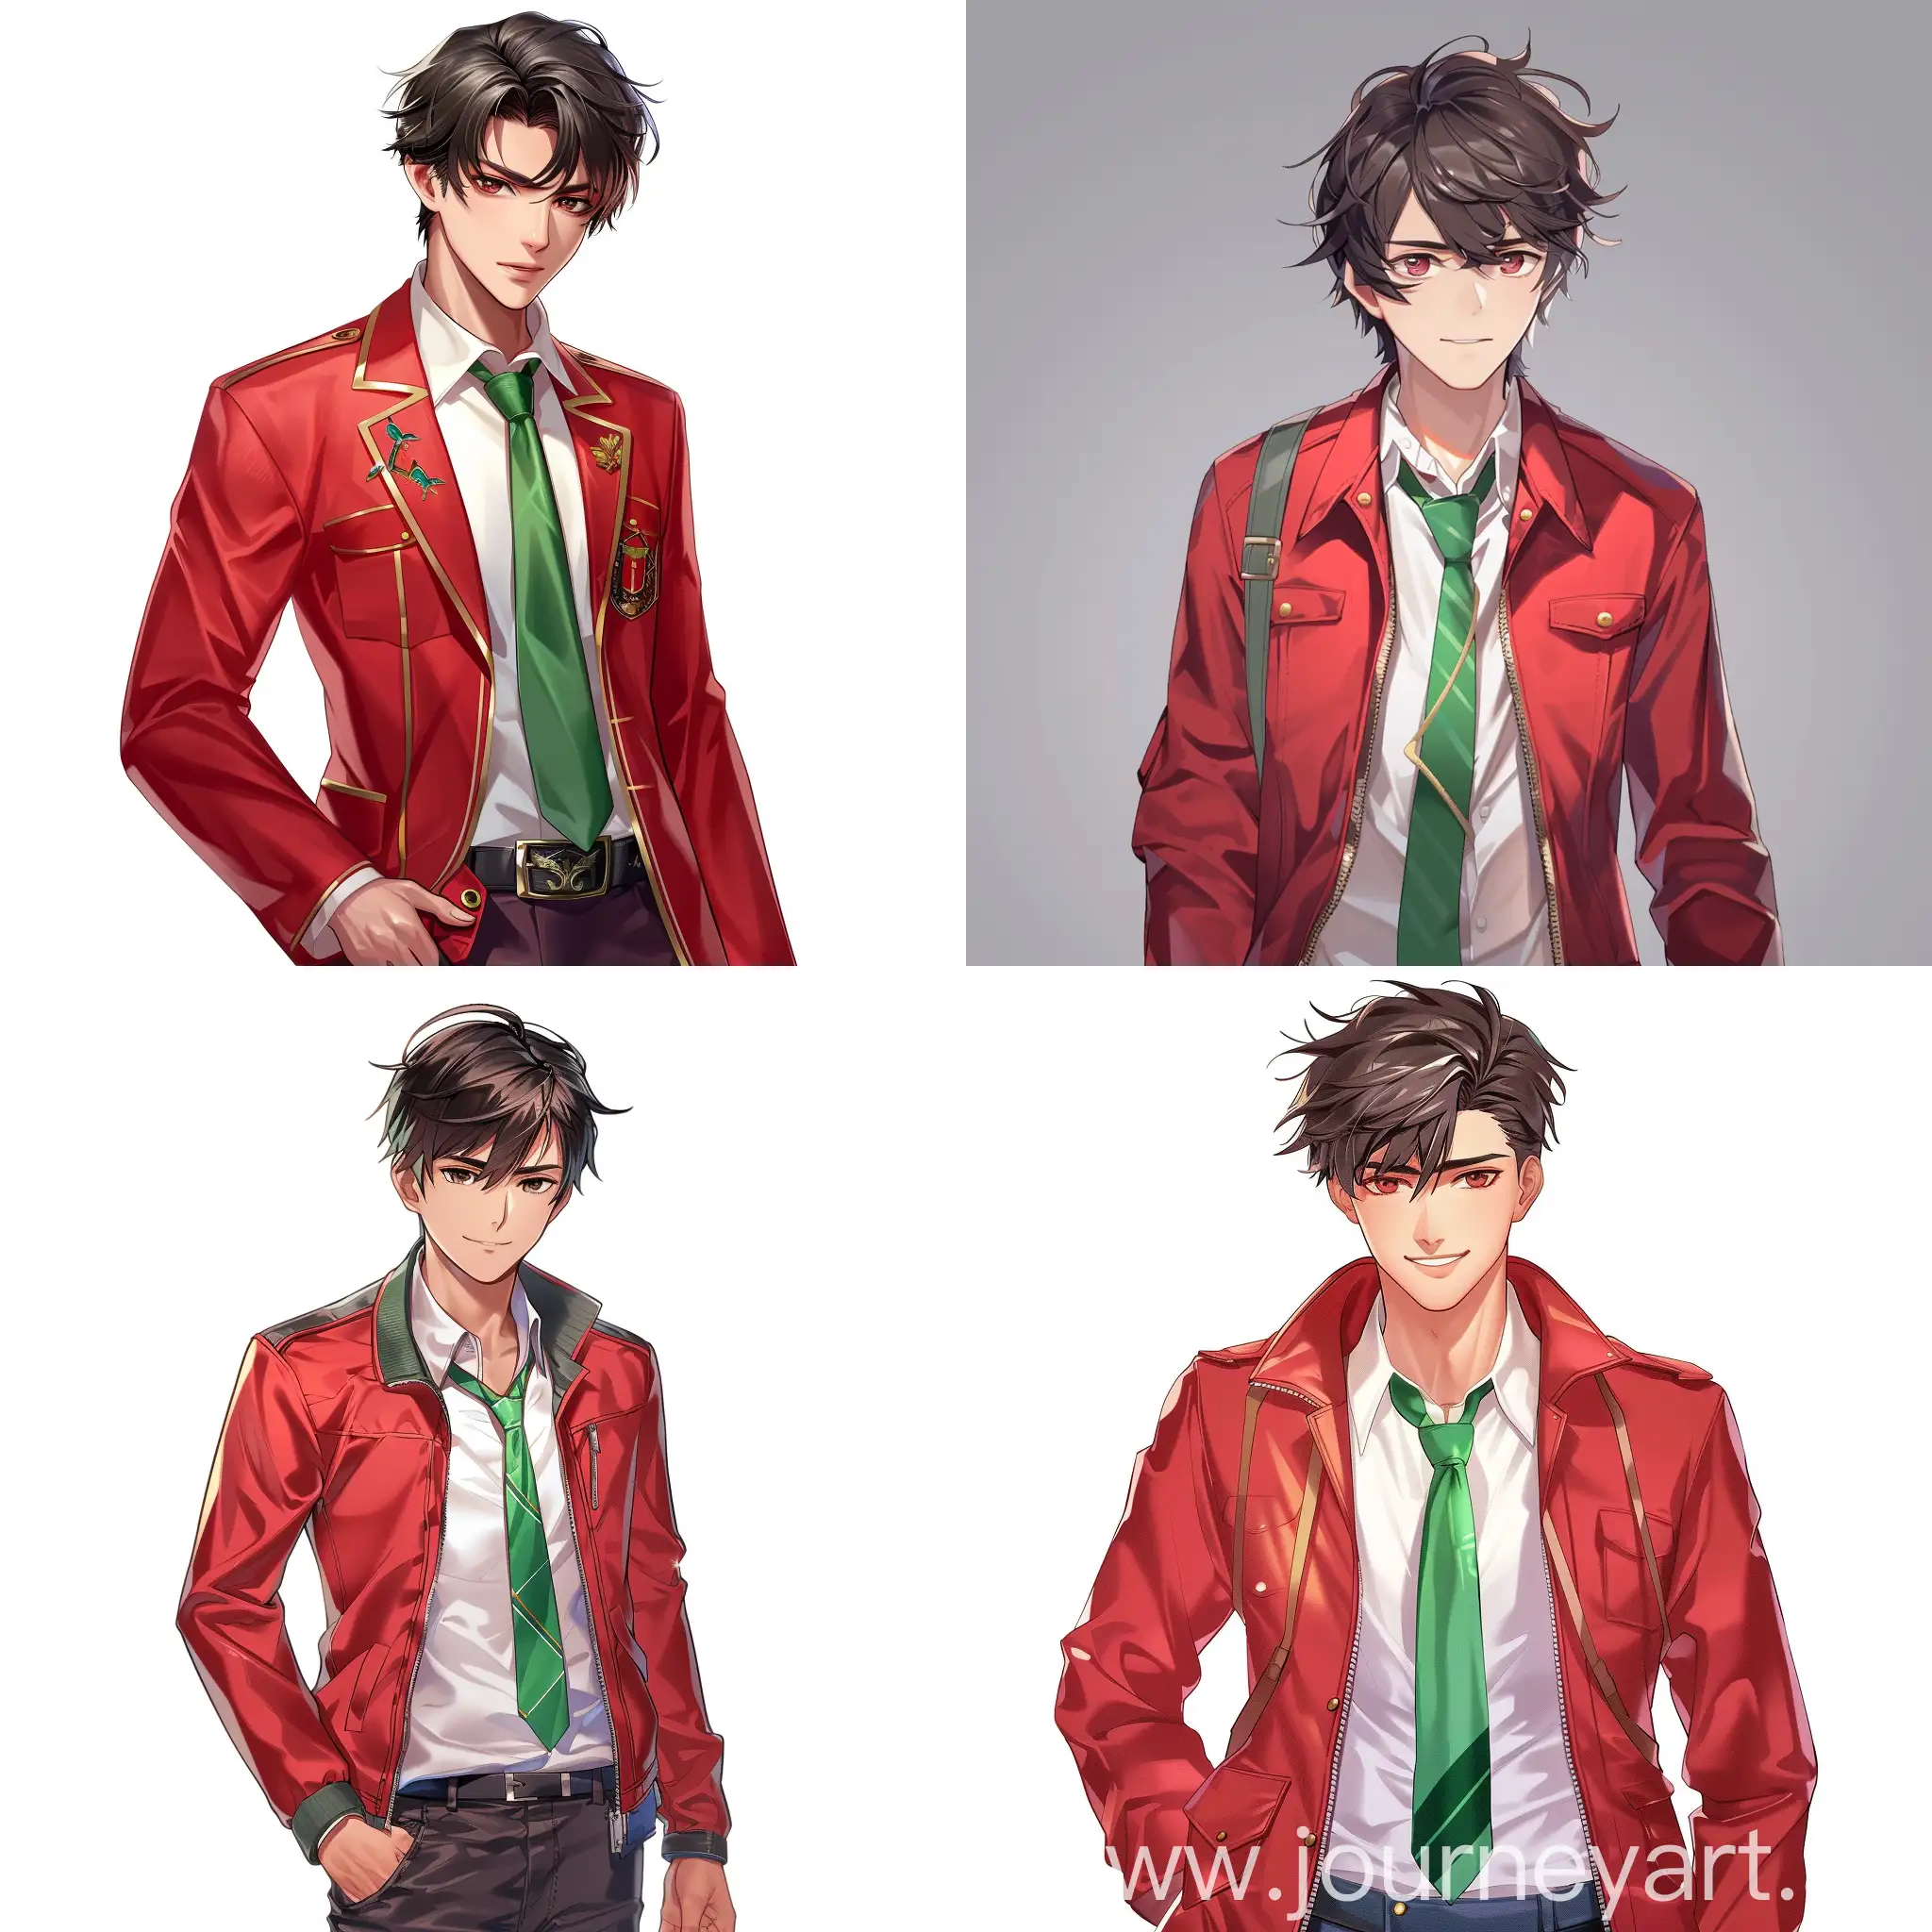 Male, Adult, Dark hair, short haircut, student, classic red jacket, White shirt, Green tie, visual novel style, Full height, High quality, slim